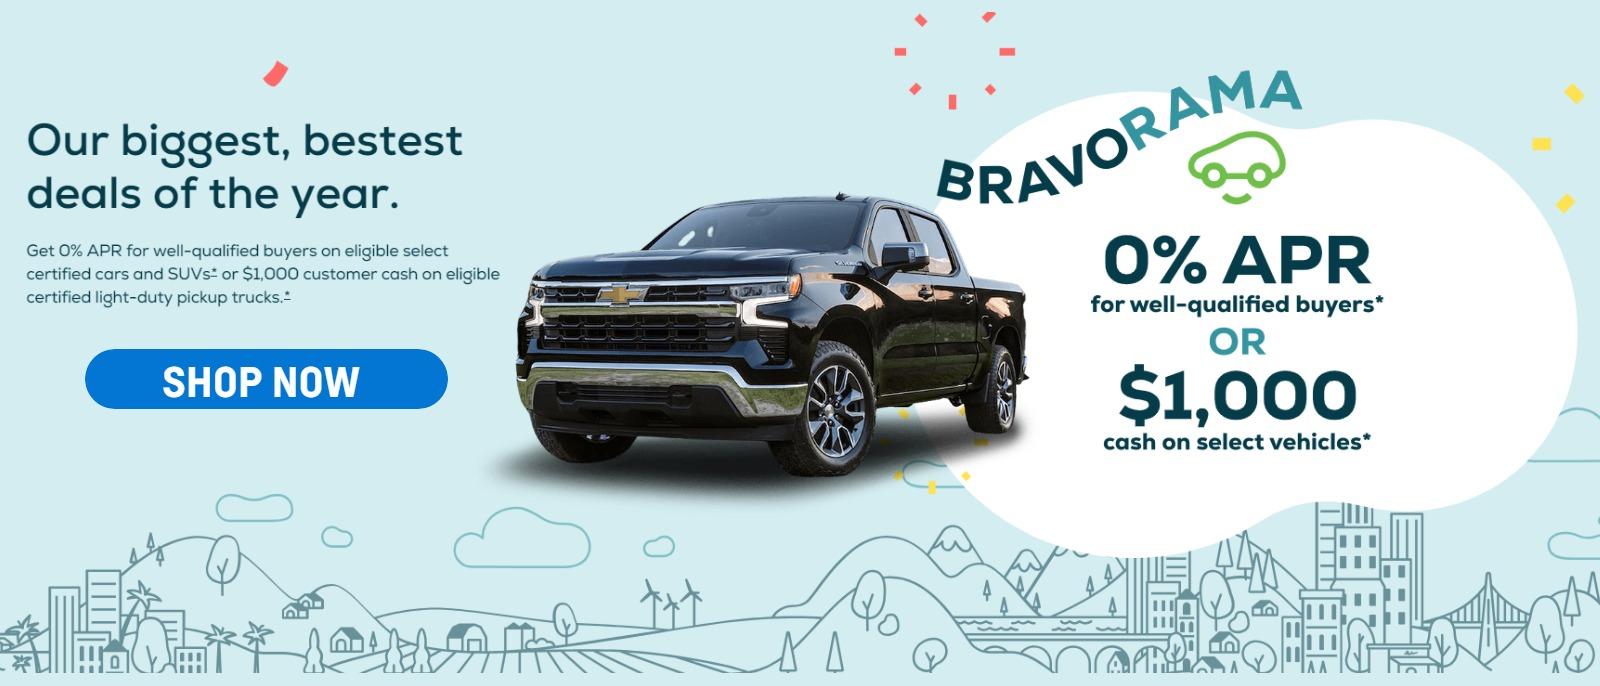 SPECIAL OFFERS ON SELECT CERTIFIED VEHICLES FROM CARBRAVO AND DAVE MCDERMOTT CHEVROLET